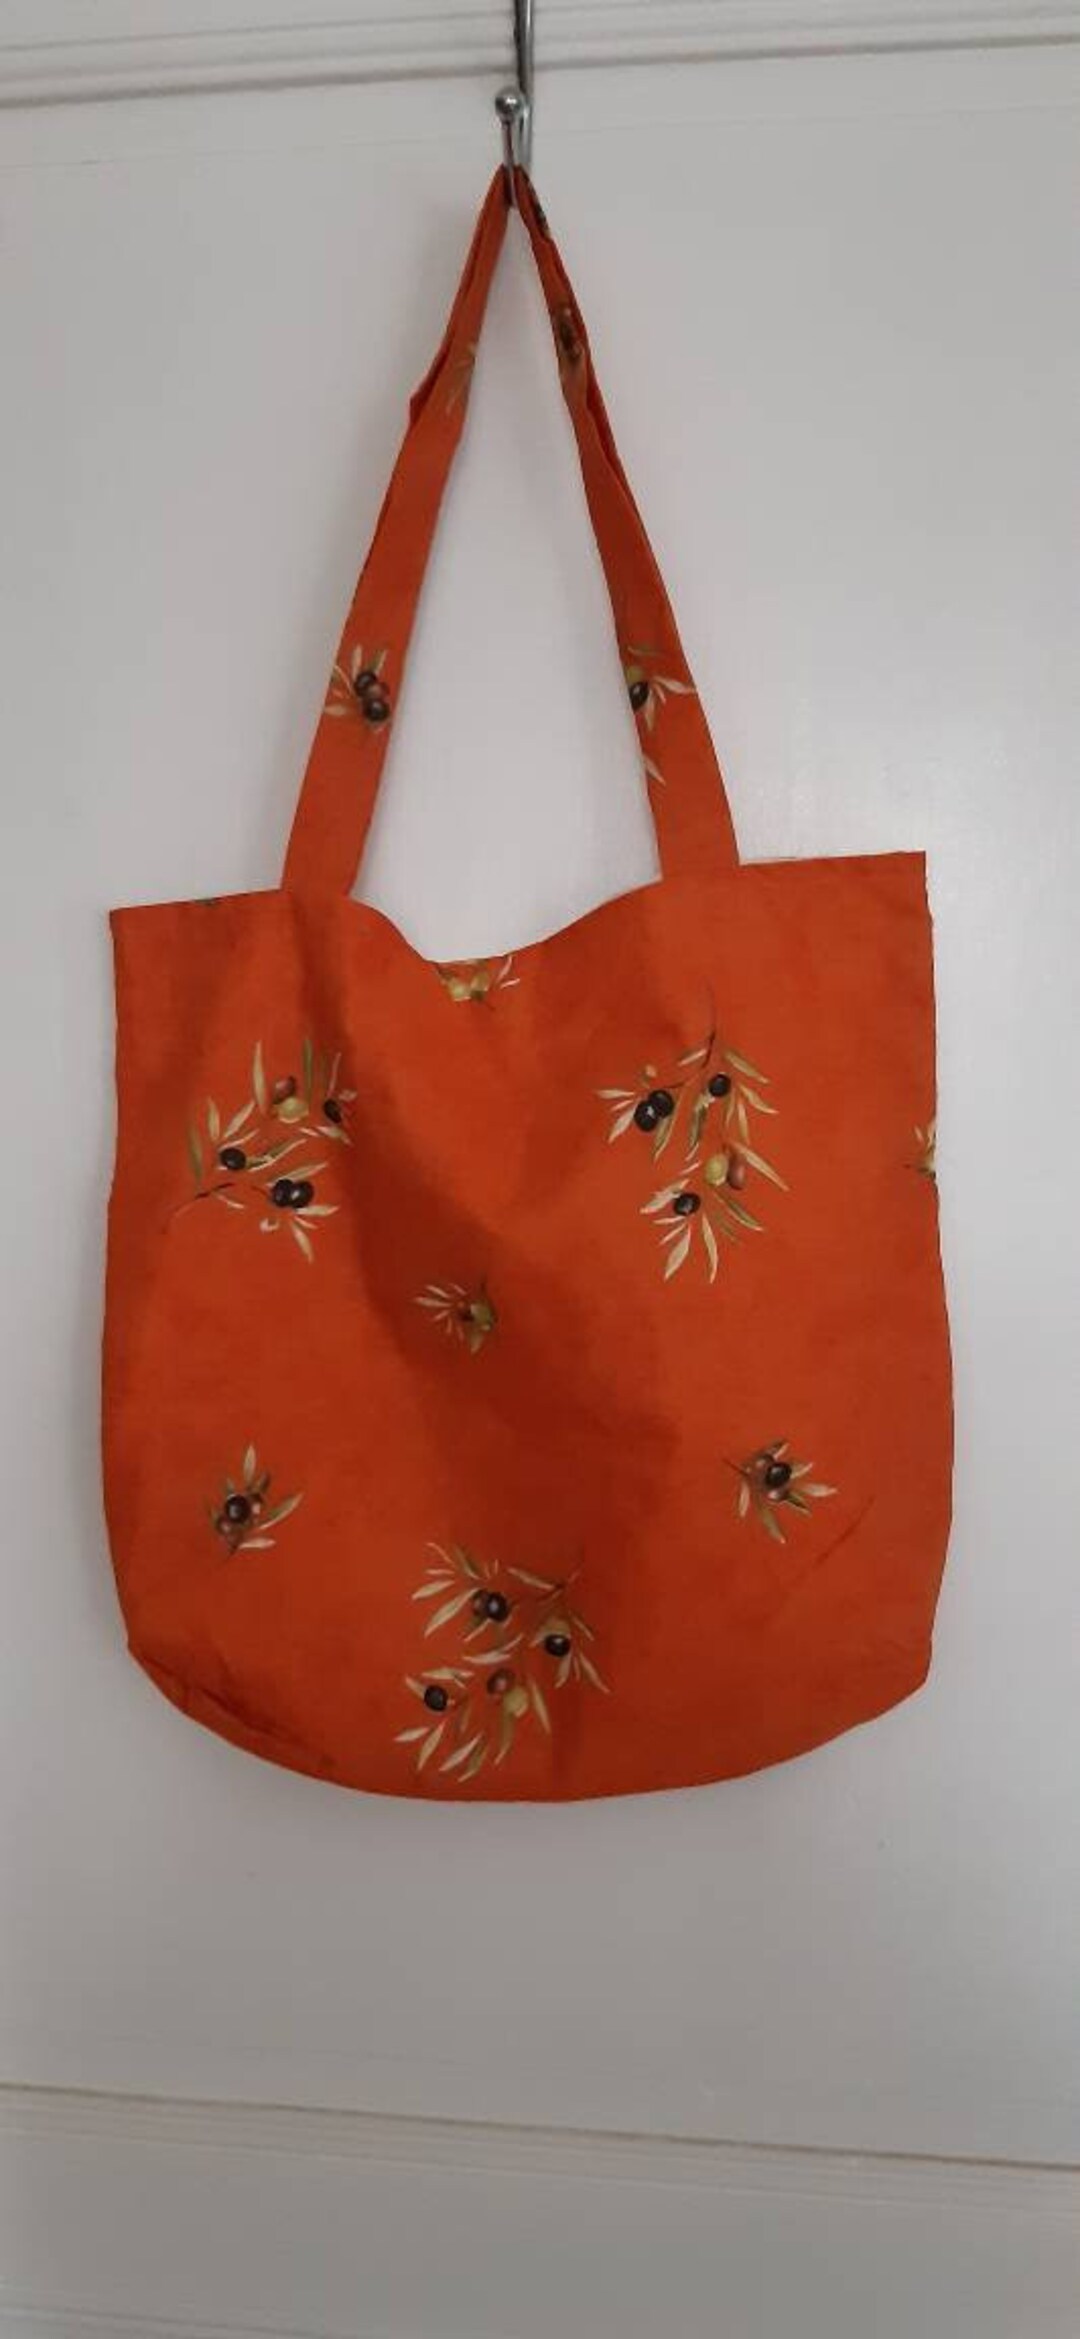 Upcycled Fabric Tote Bag for Women - Rimagined